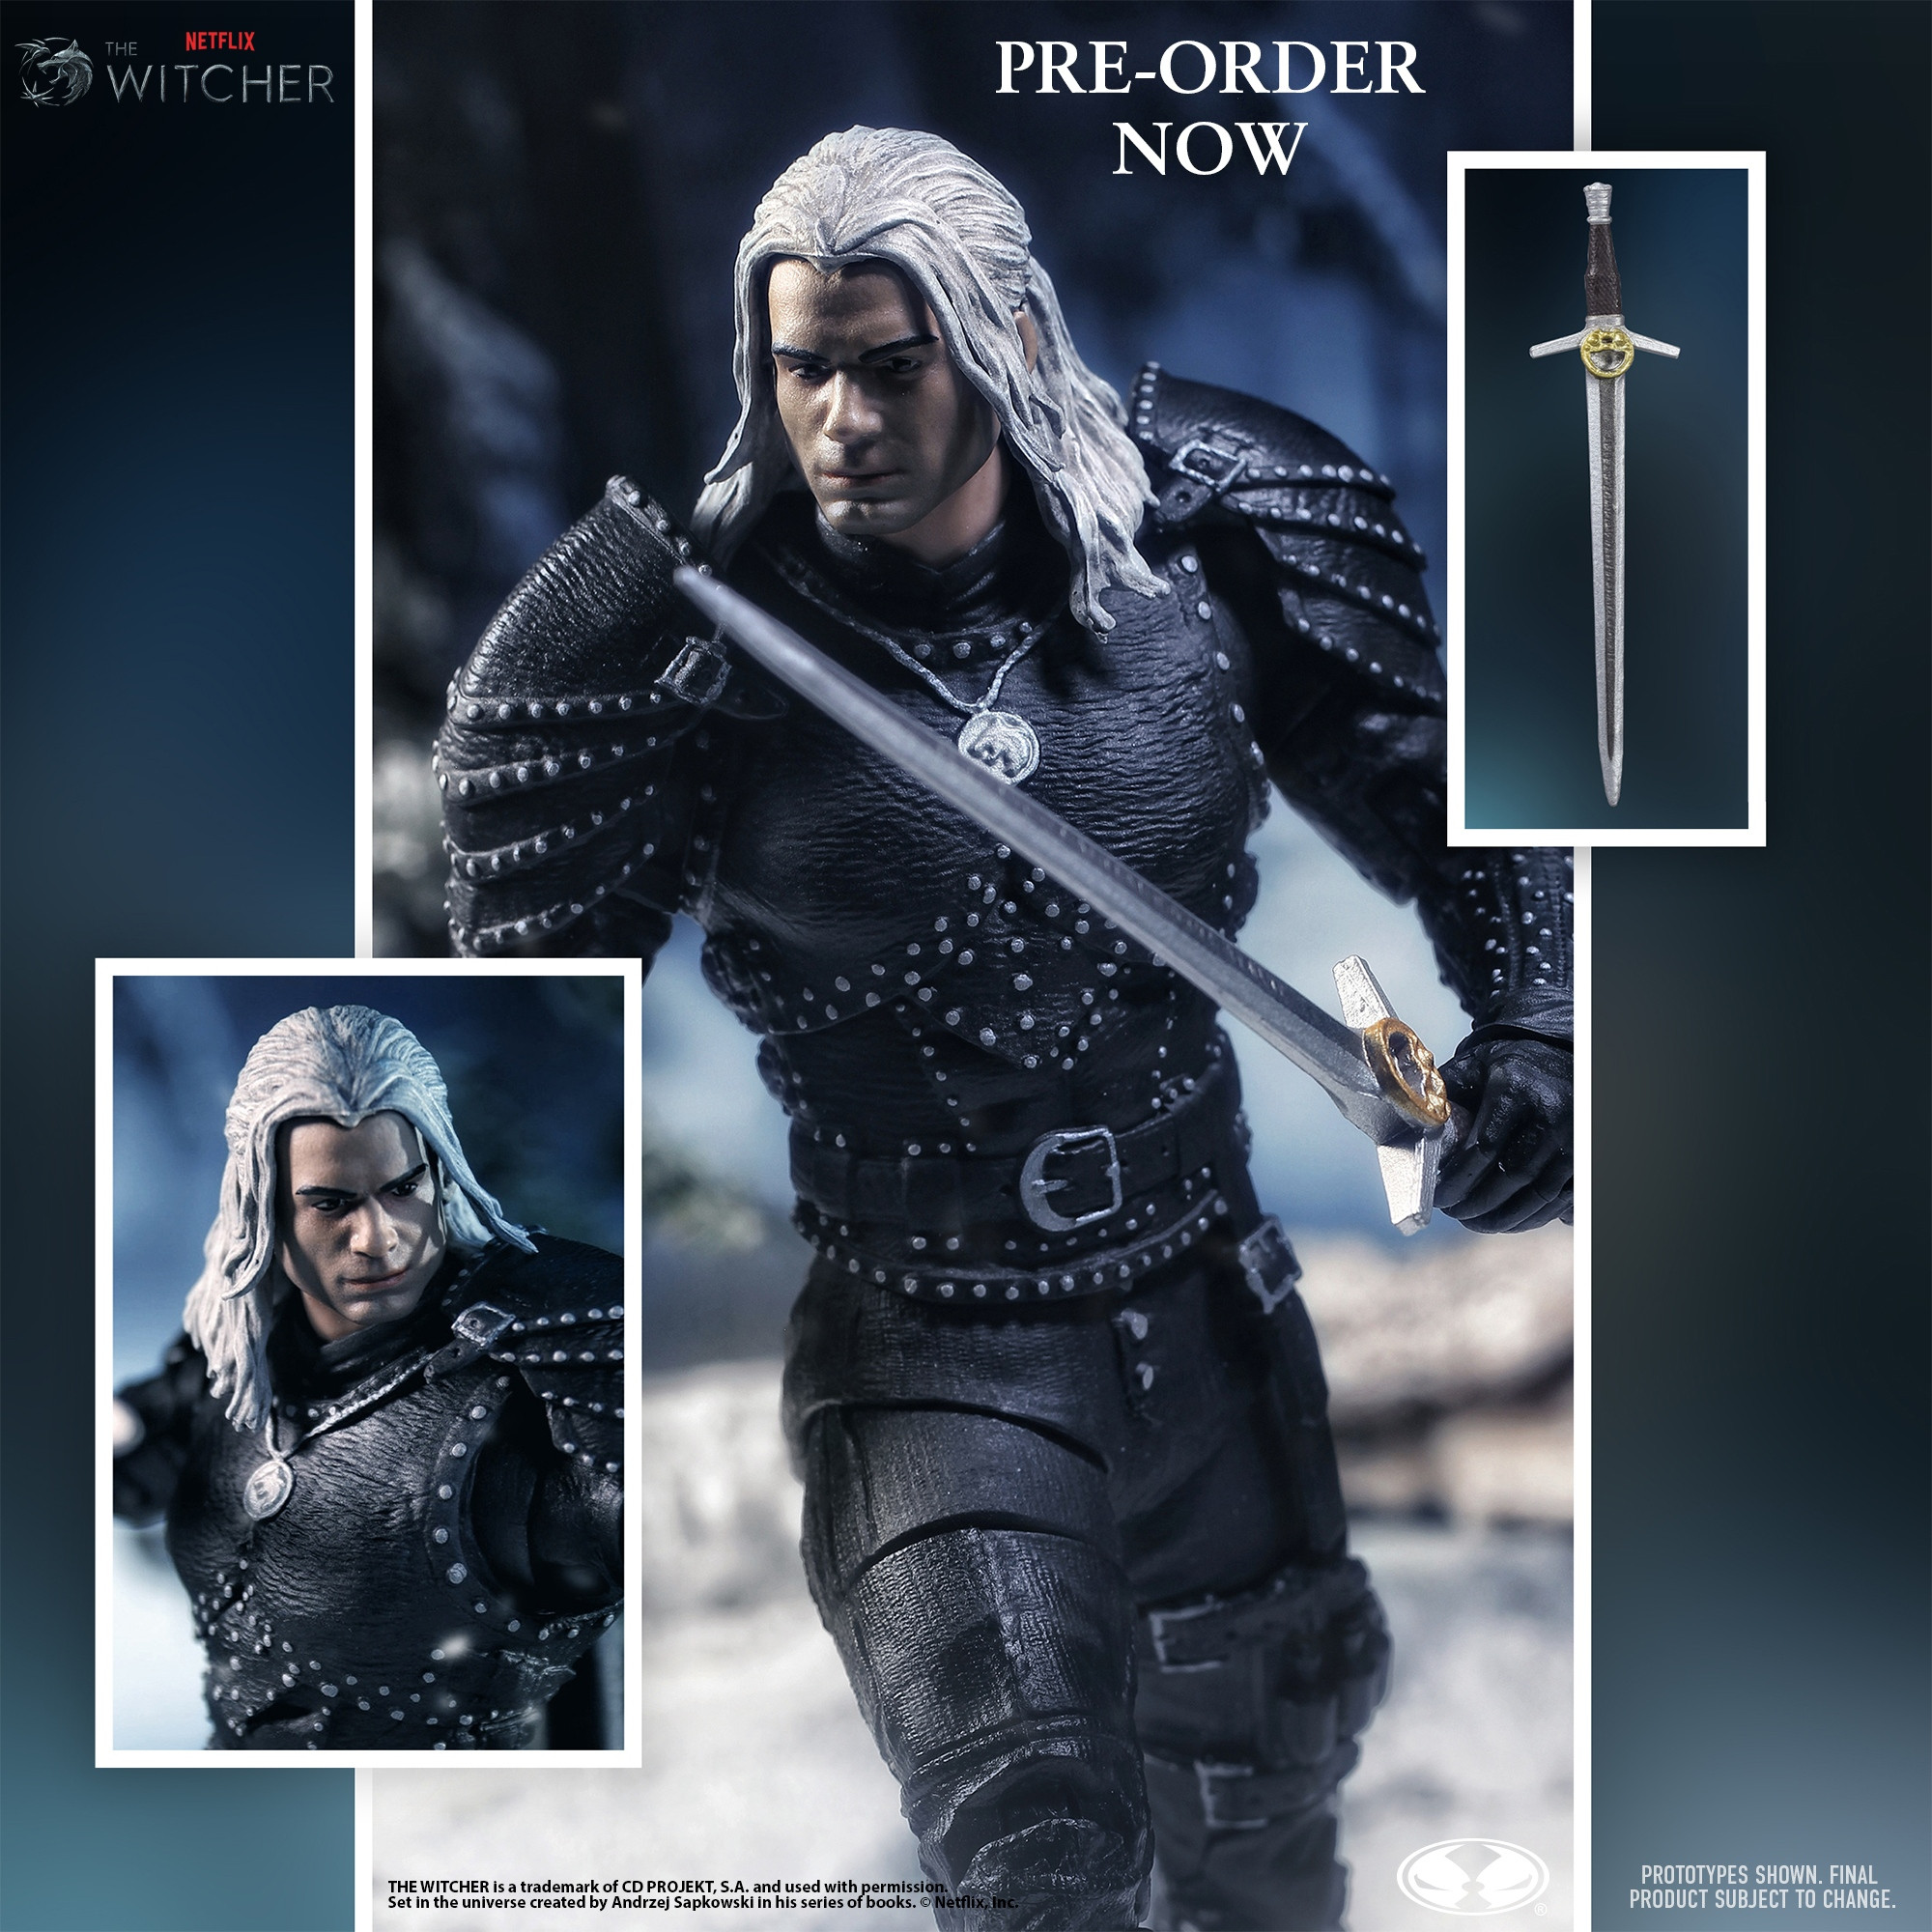 Witcher - Season 2 Geralt - I helped with articulation engineering